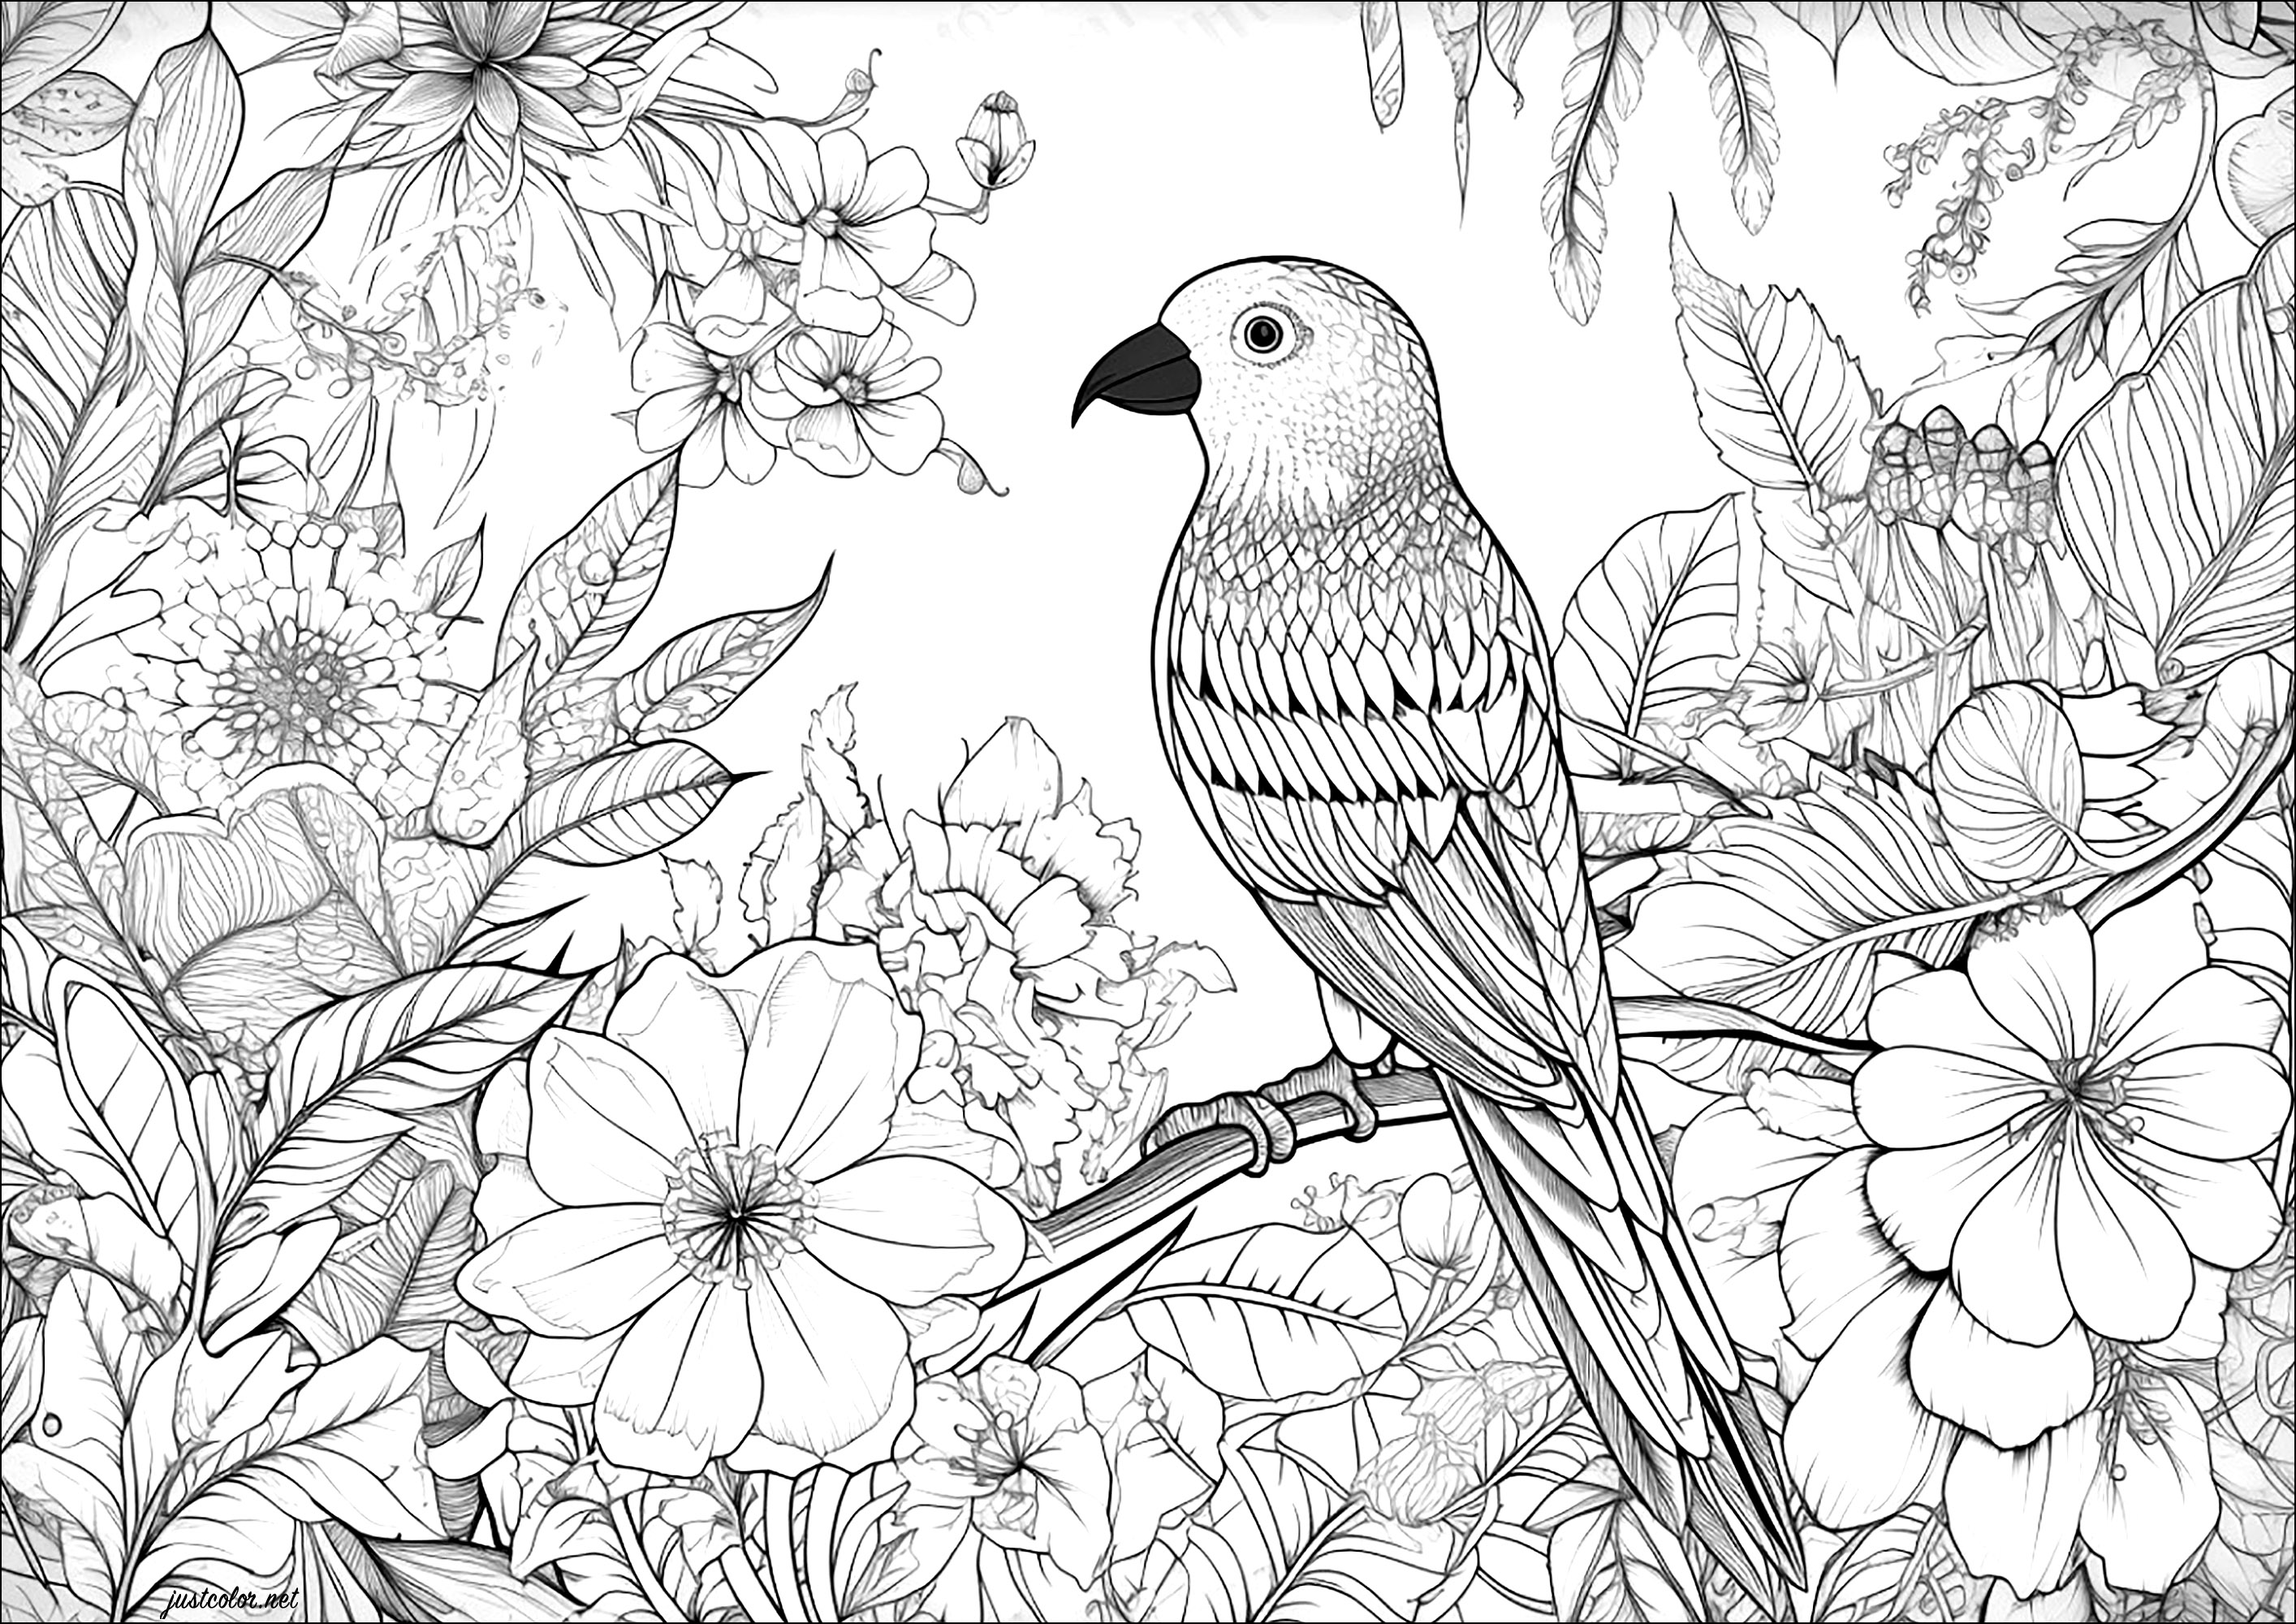 Beautiful bird and flowery background. A coloring page with lots of details to color, both in the bird and in the flowers in the background.